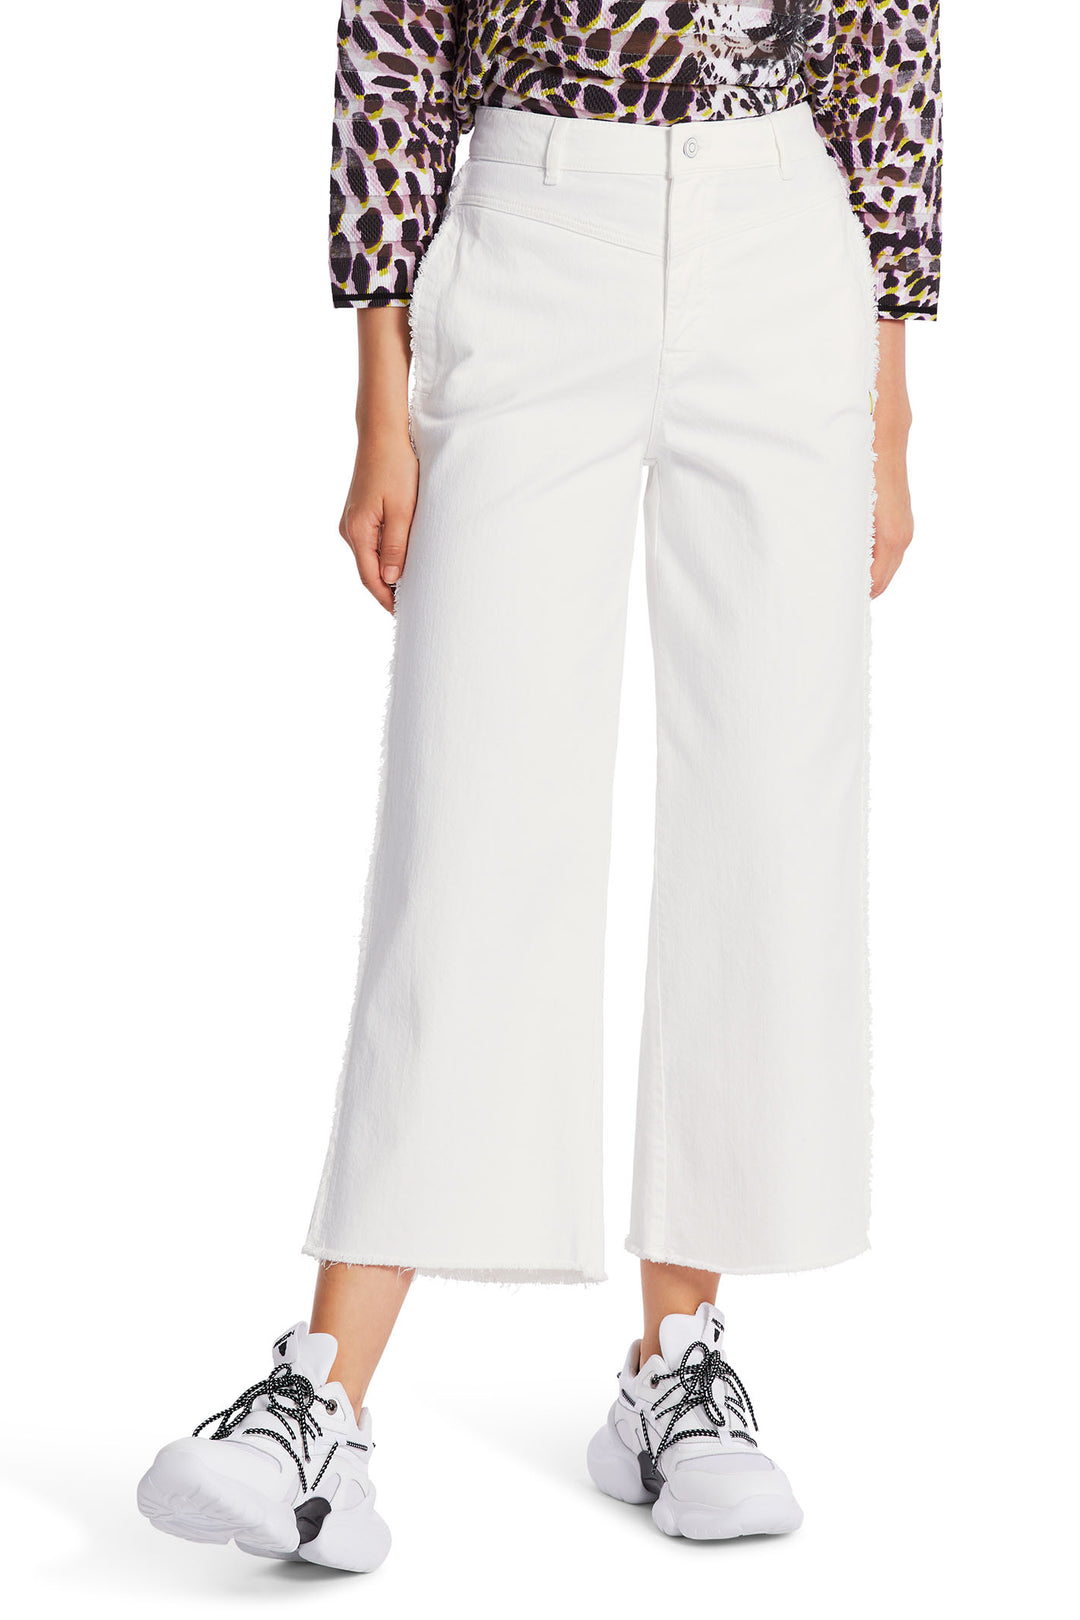 Marc Cain Sports WS 82.10 D02 110 Off-White Wylie Jeans - Olivia Grace Fashion